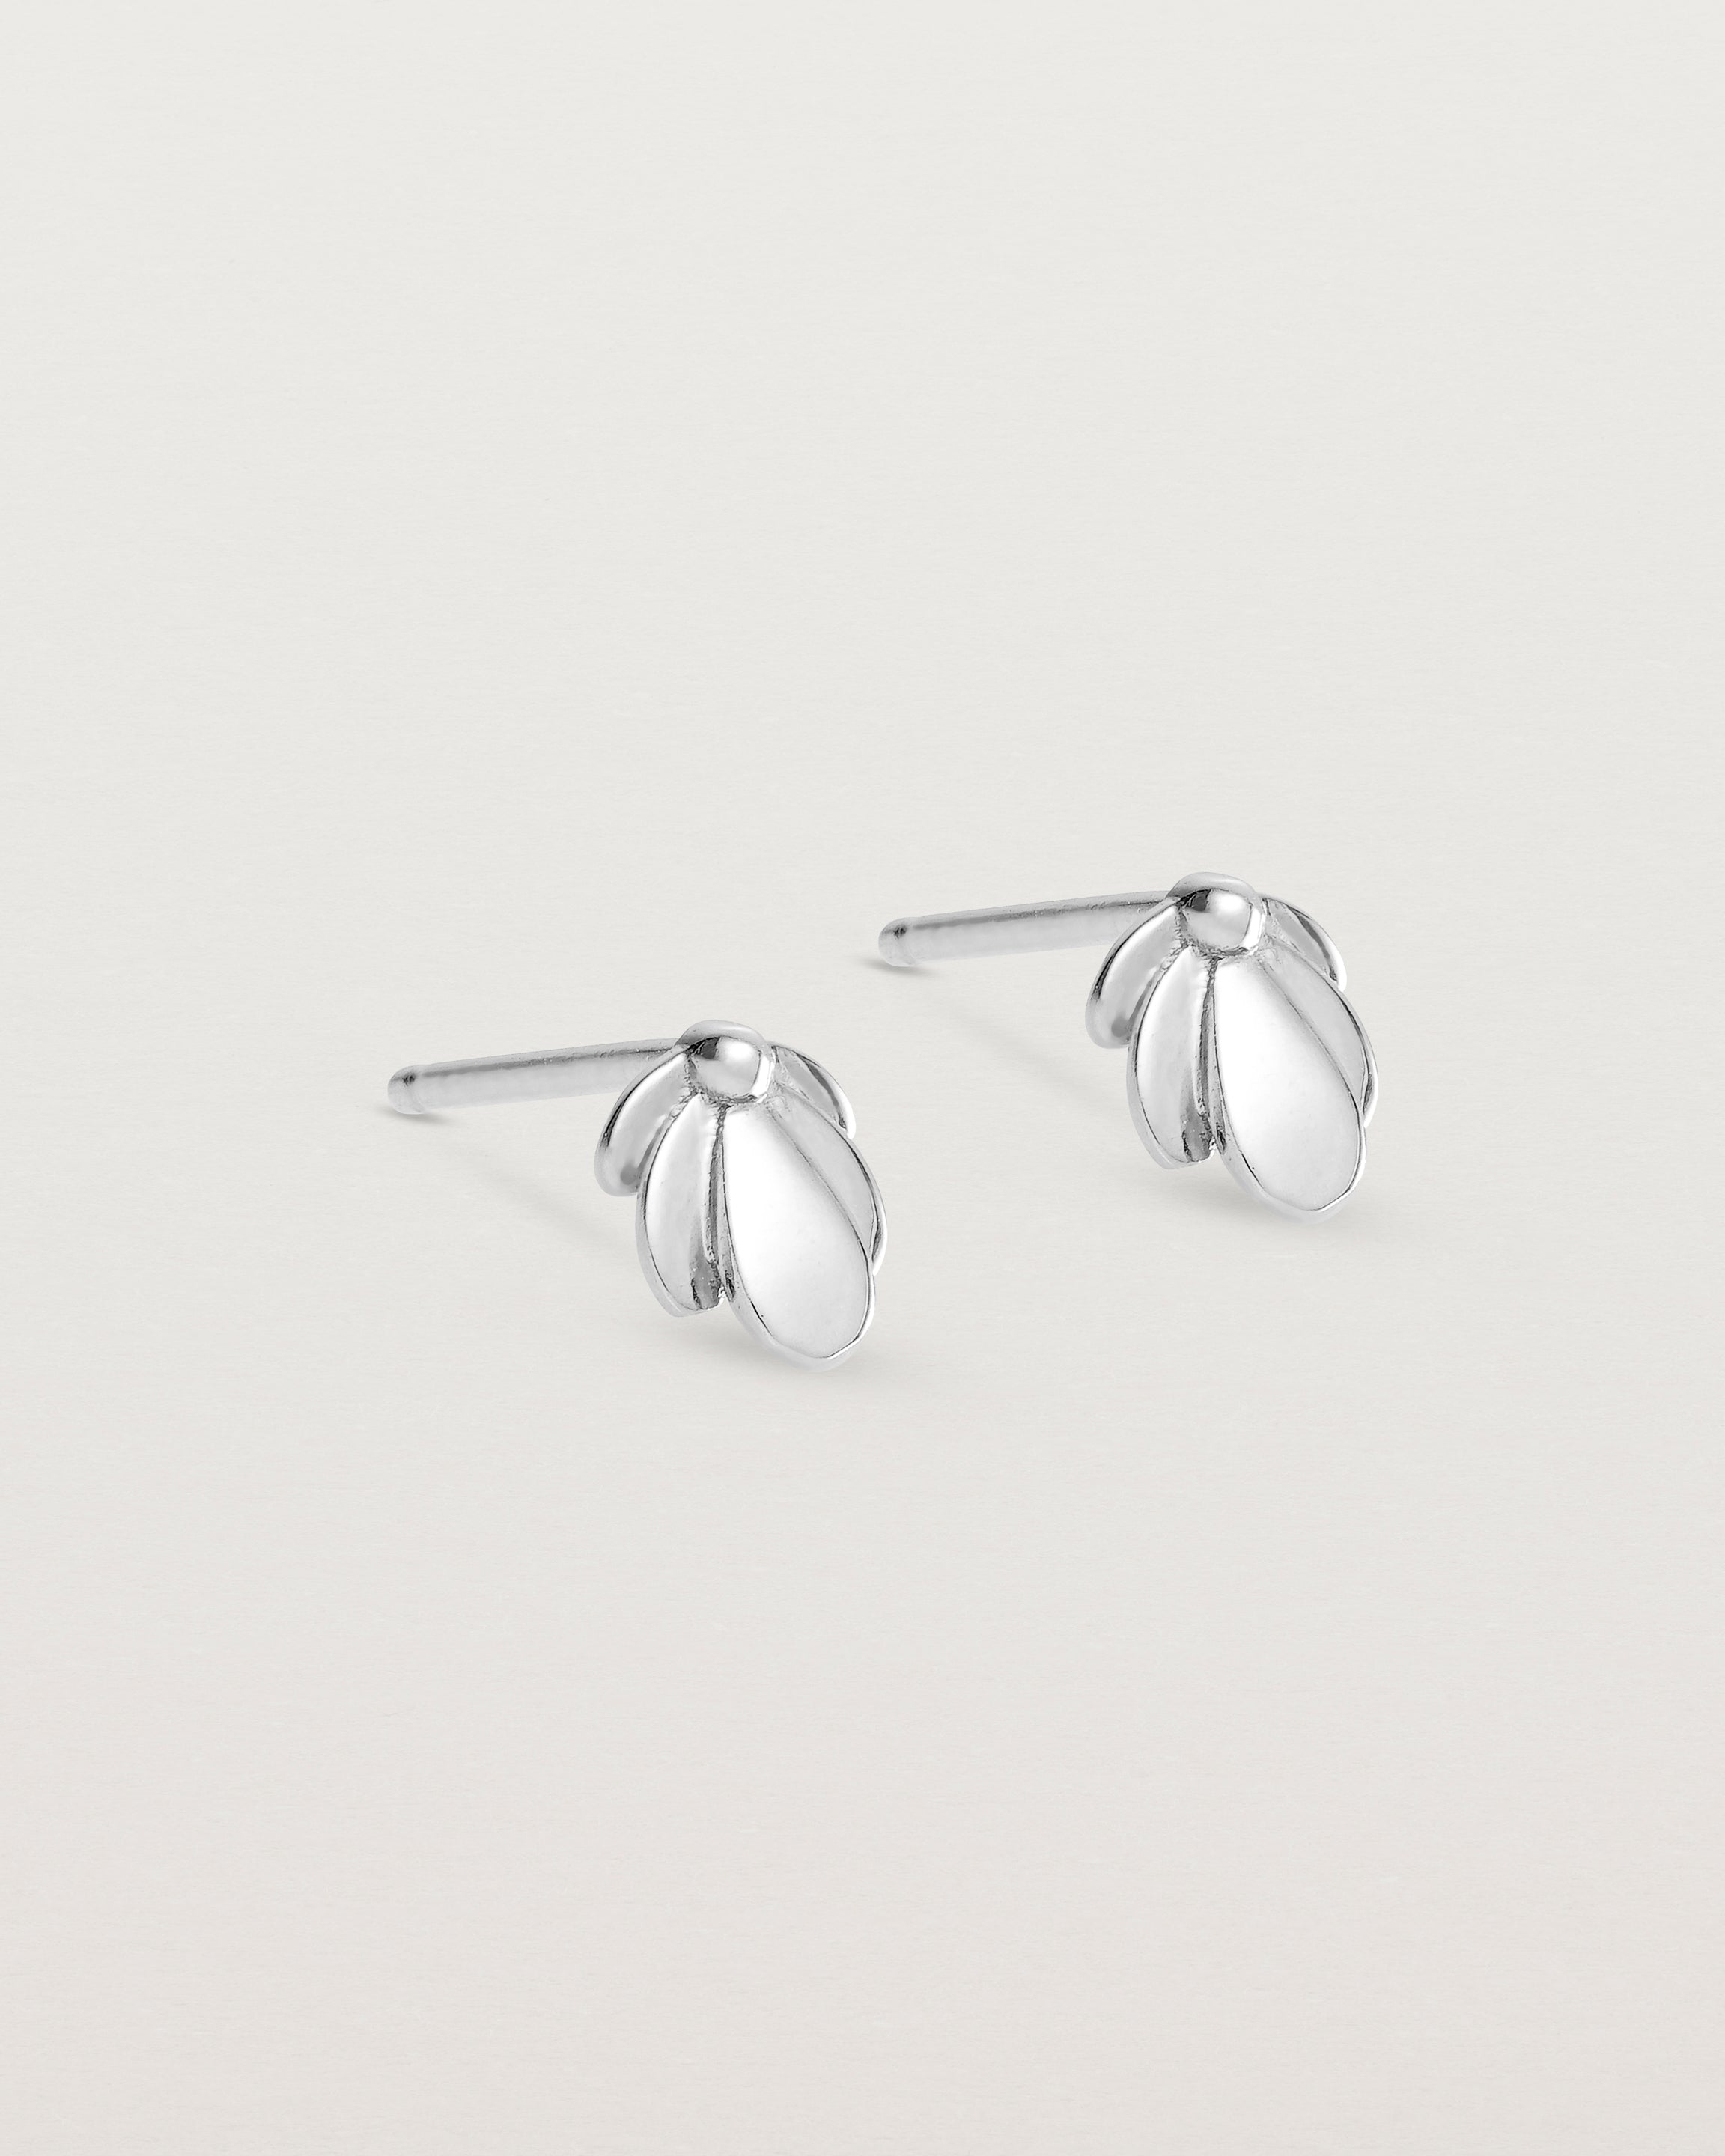 Angled view of the Aeris Studs in Sterling Silver.